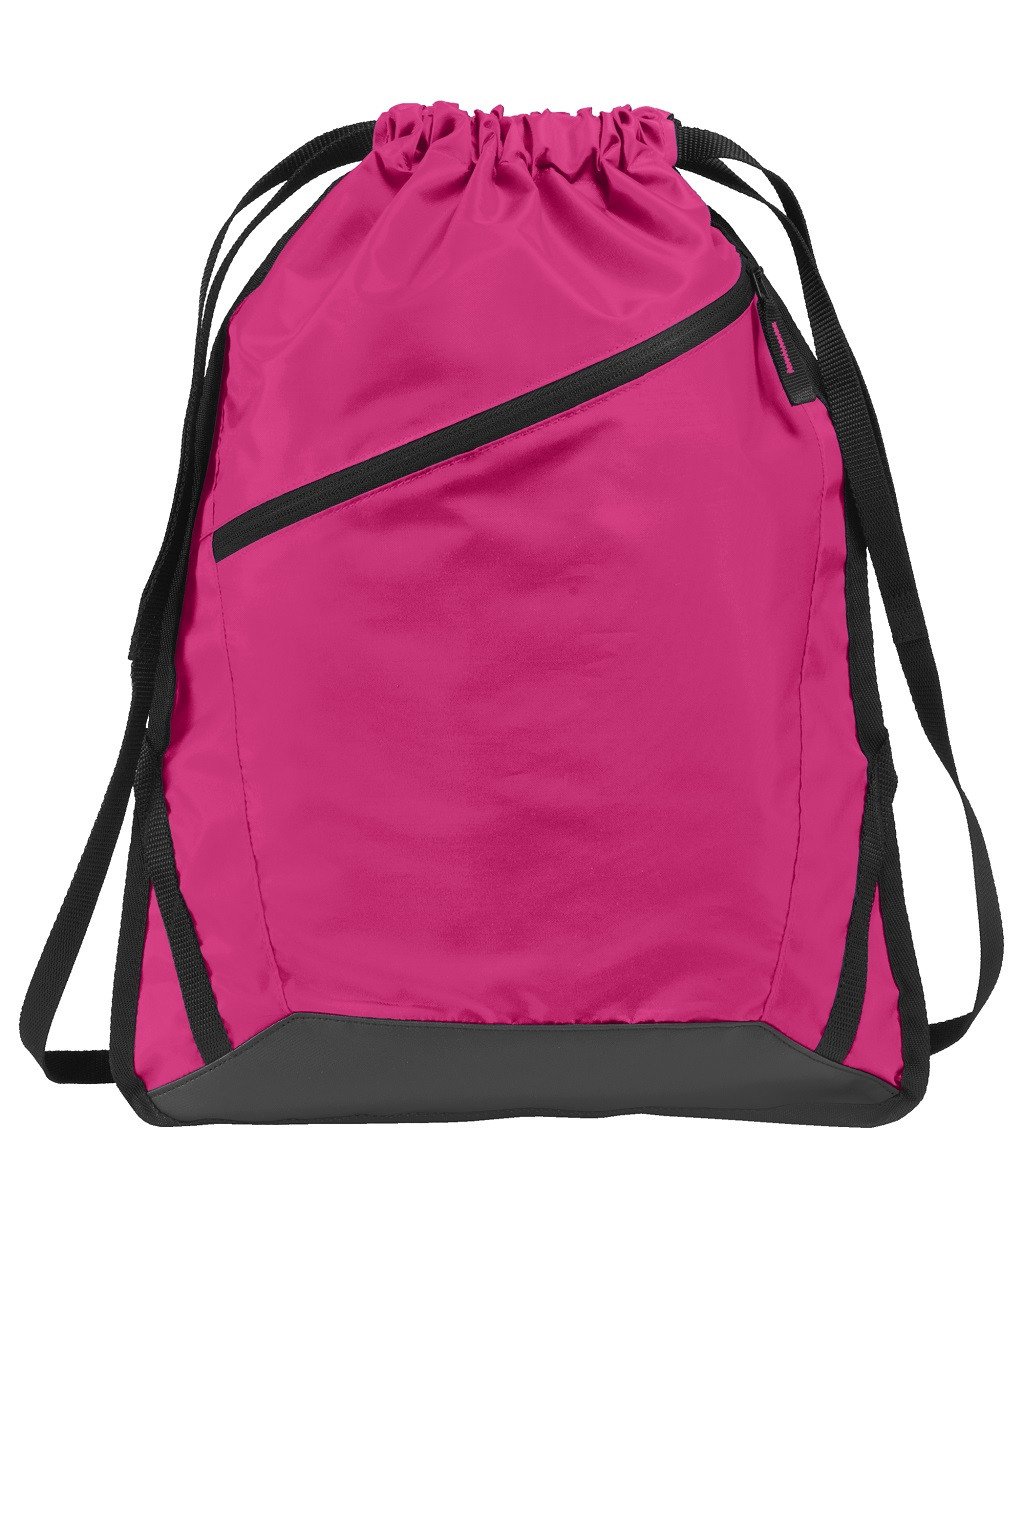 60 ct Zip-It Drawstring Backpack with Adjustable Straps - By Case